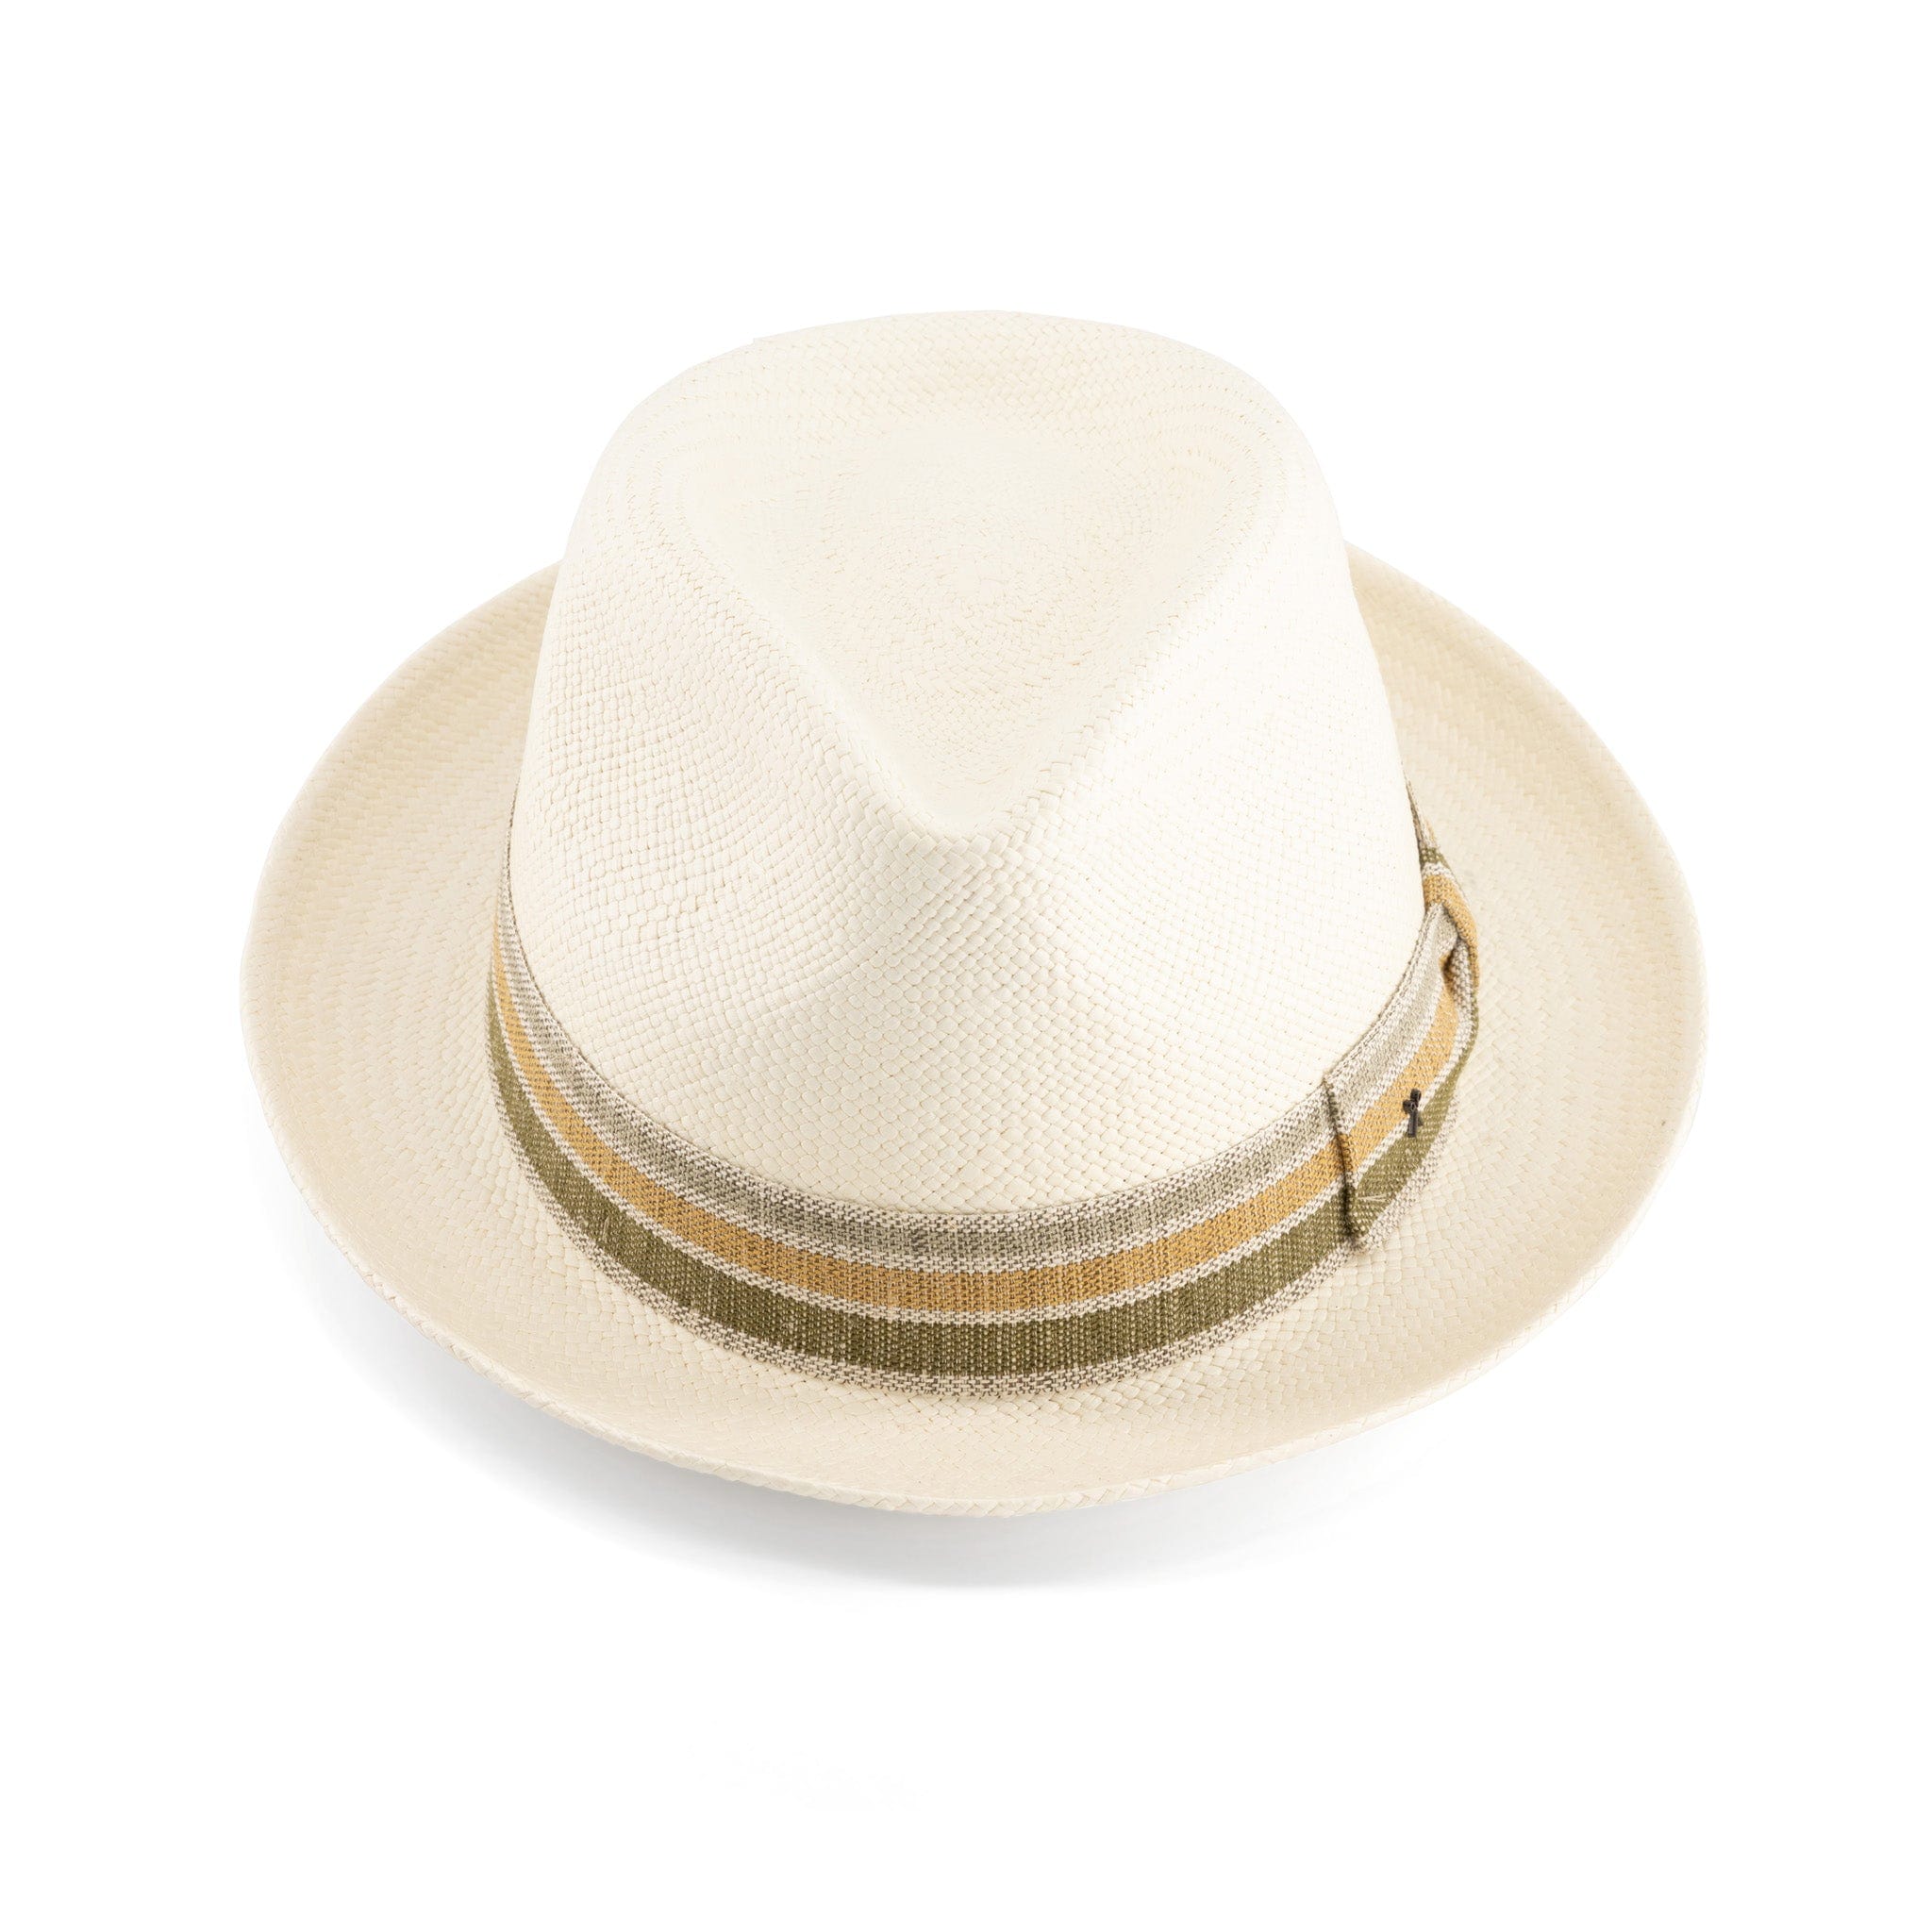 Unisex | Trilby Panama Hat | White Toquilla | Olive Multi Band | Made in Italy